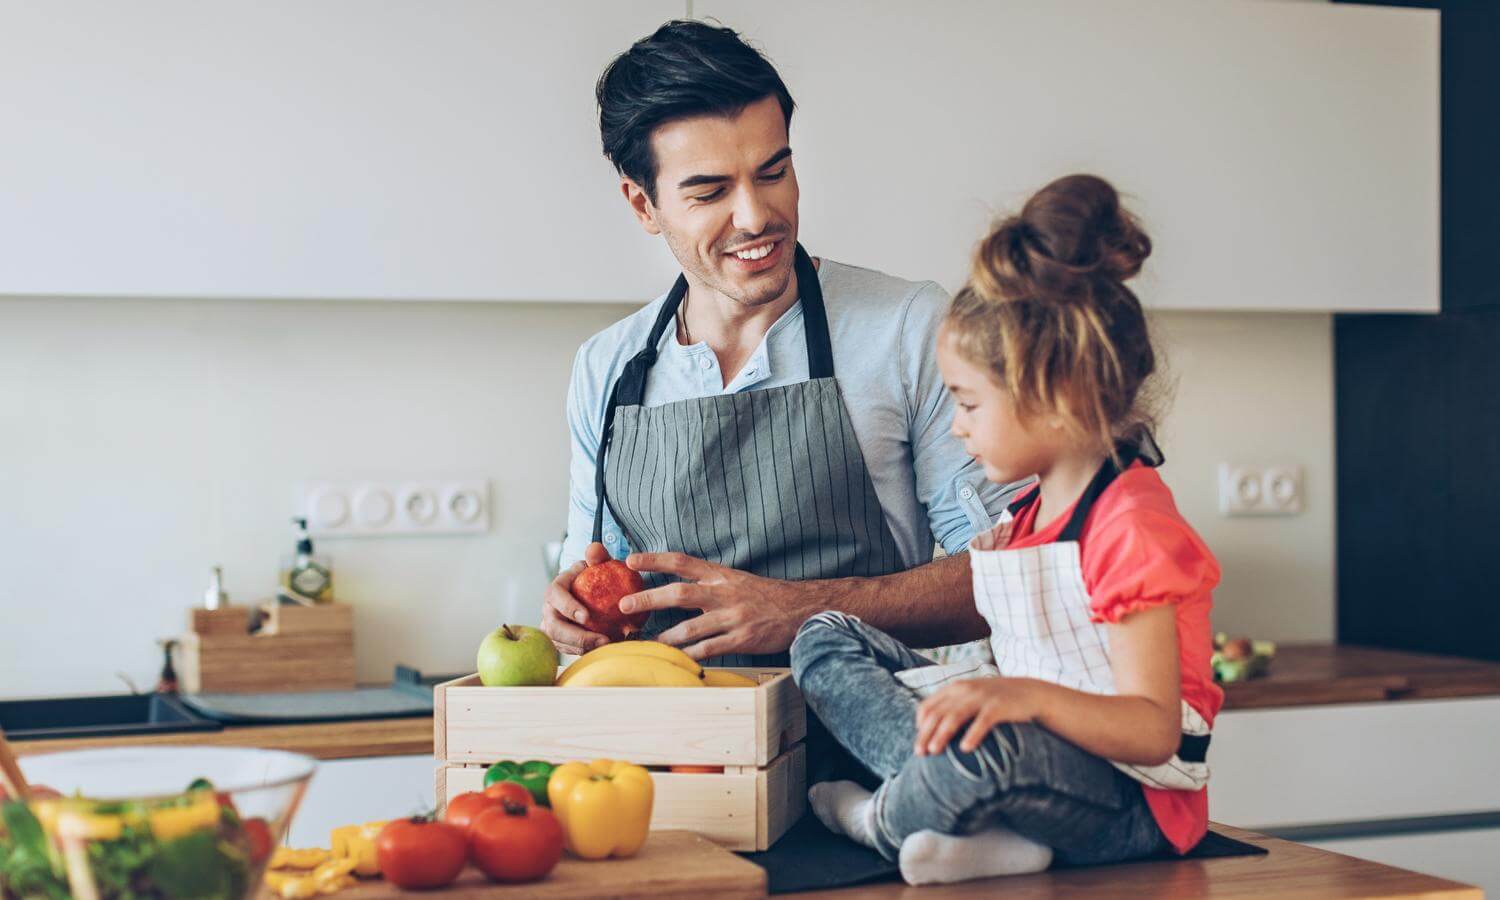 Adult father figure smiling at young girl sitting cross legged on counter with assortment of fruits and vegetables